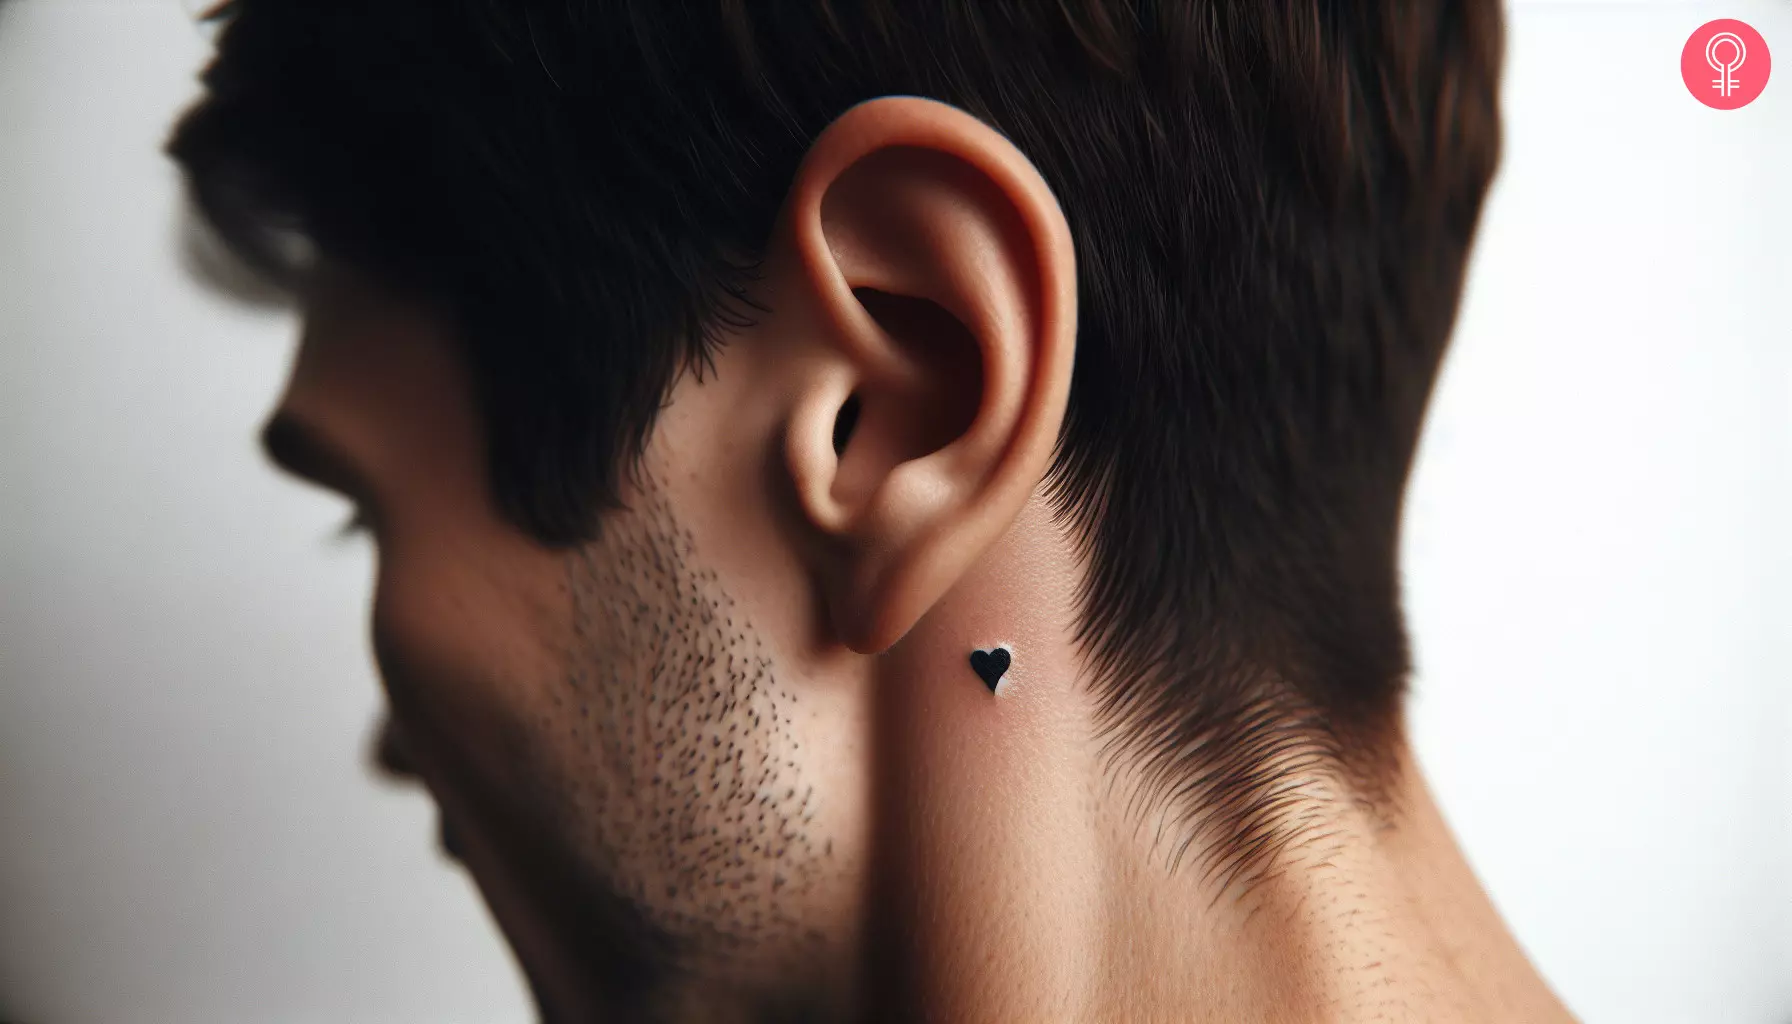 Tiny heart tattoo at the back of the ear